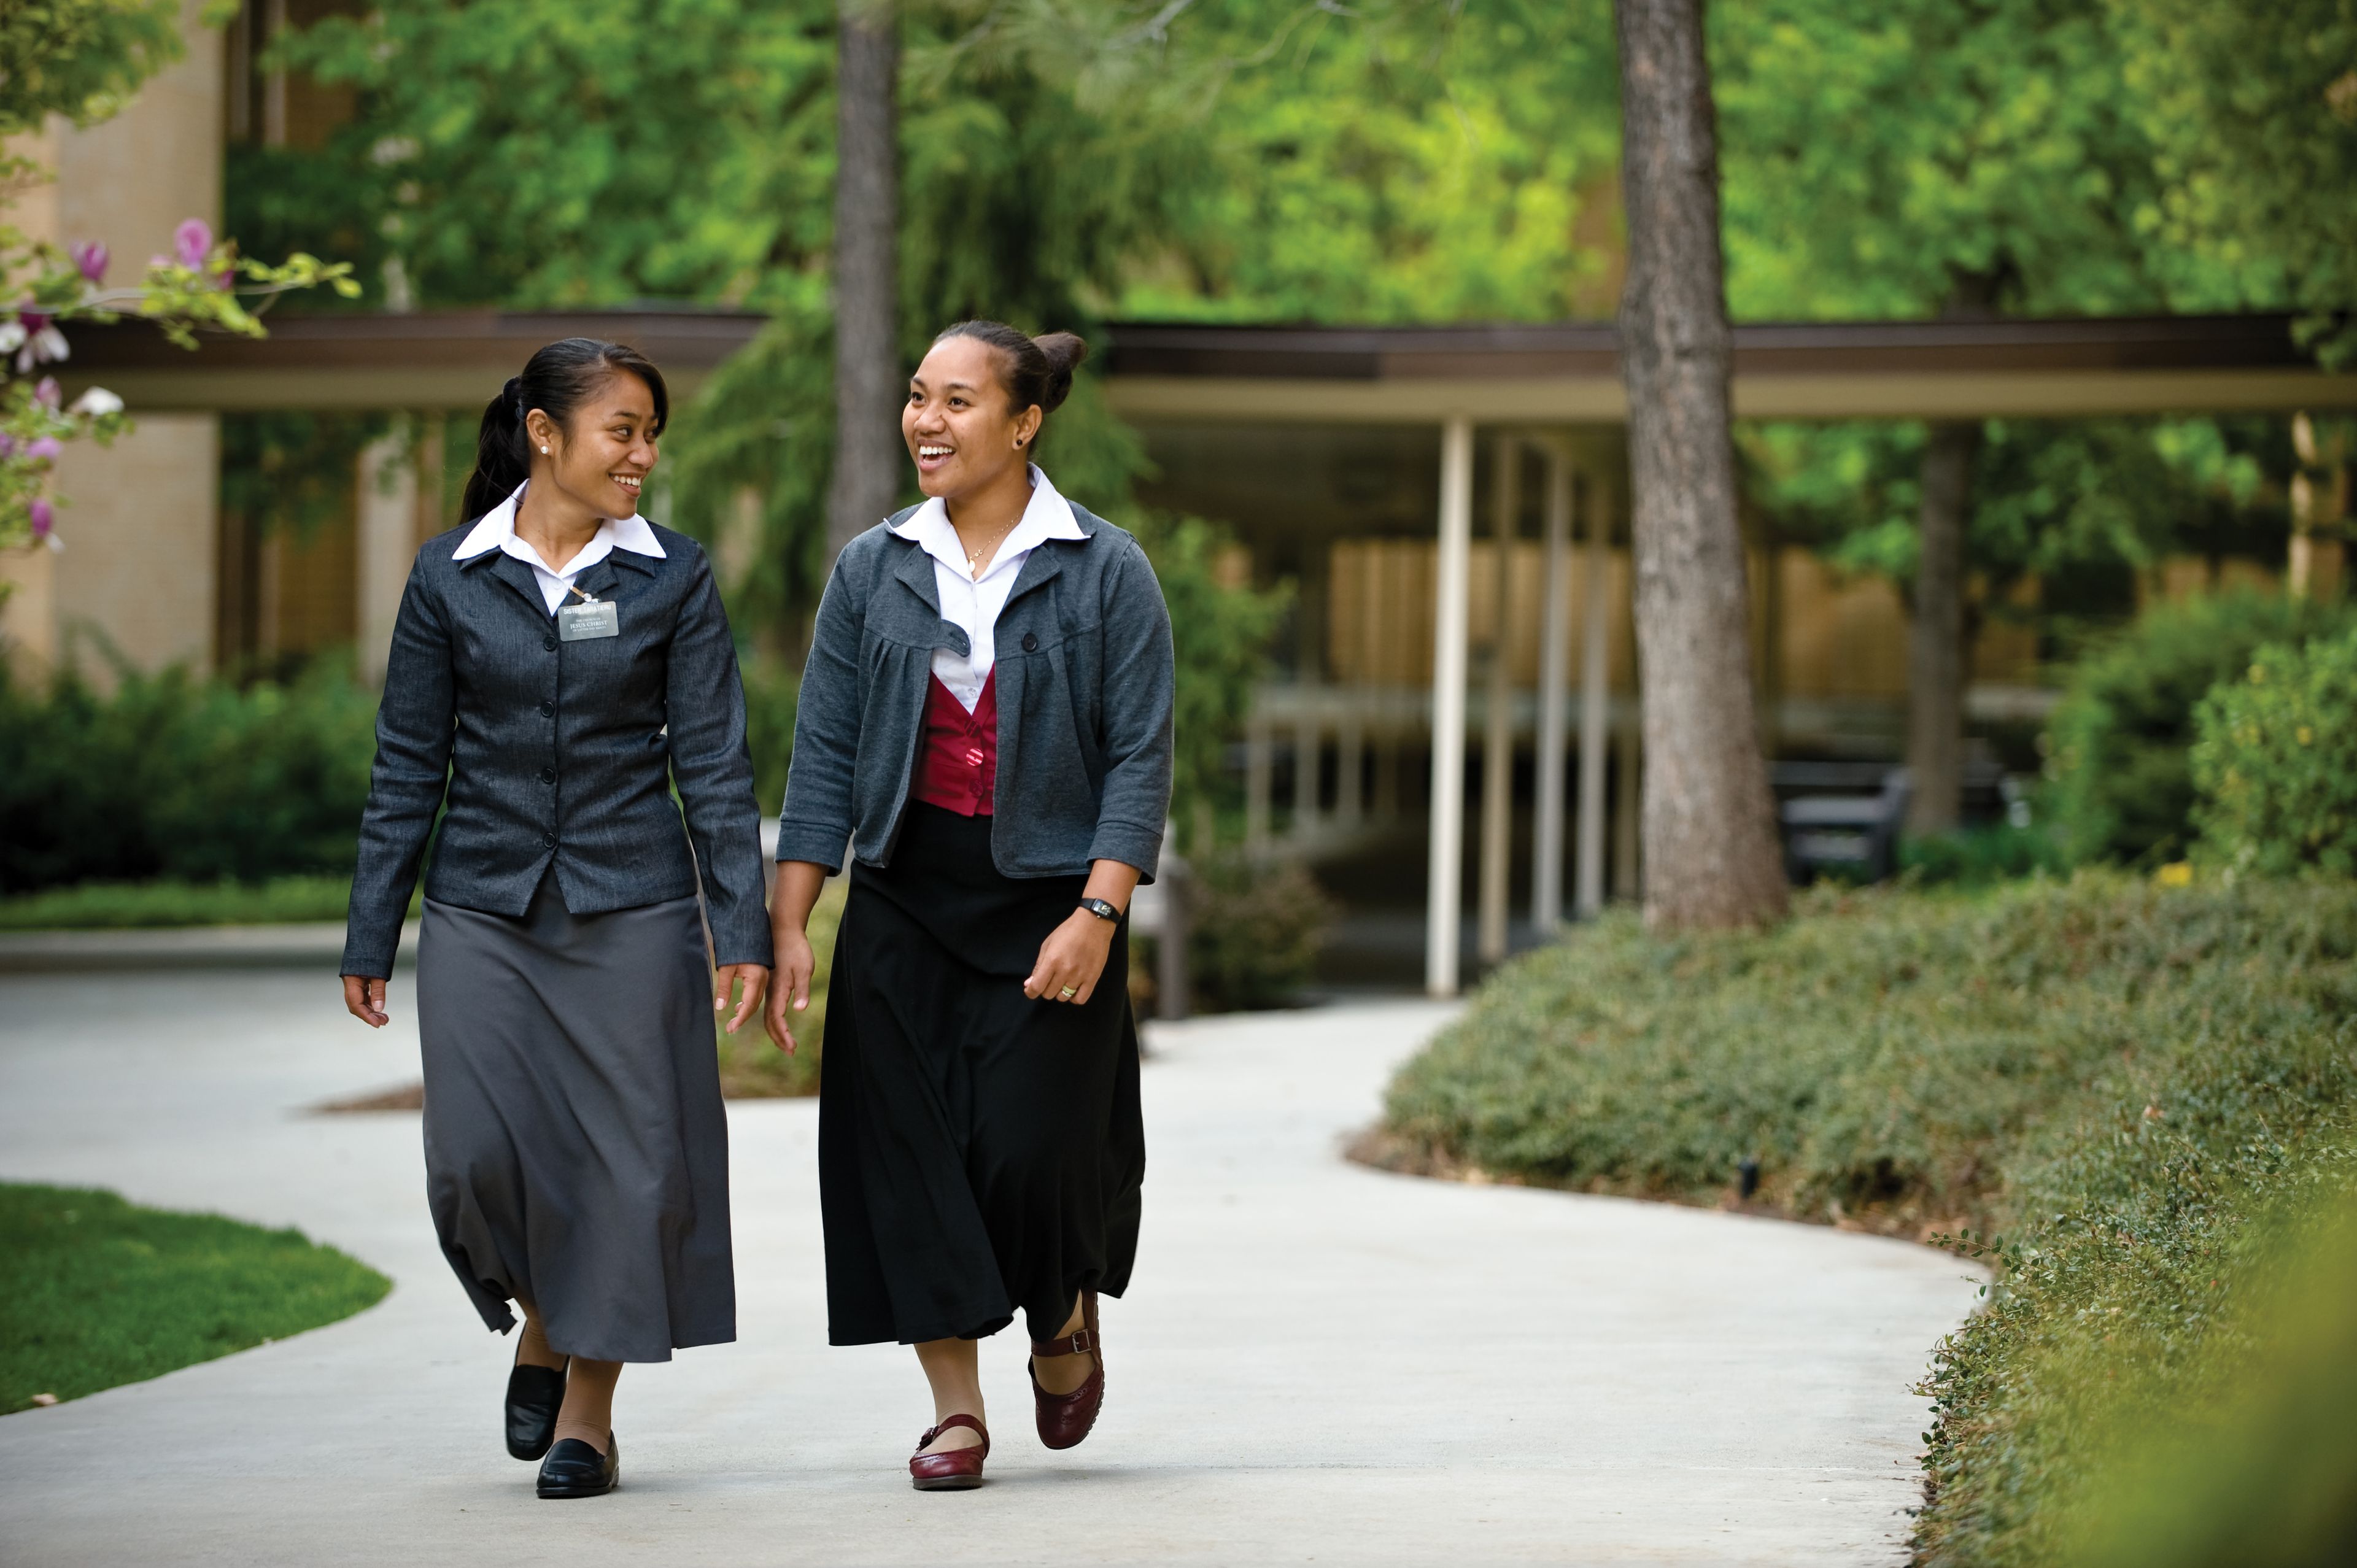 A sister missionary companionship walking at the Missionary Training Center.